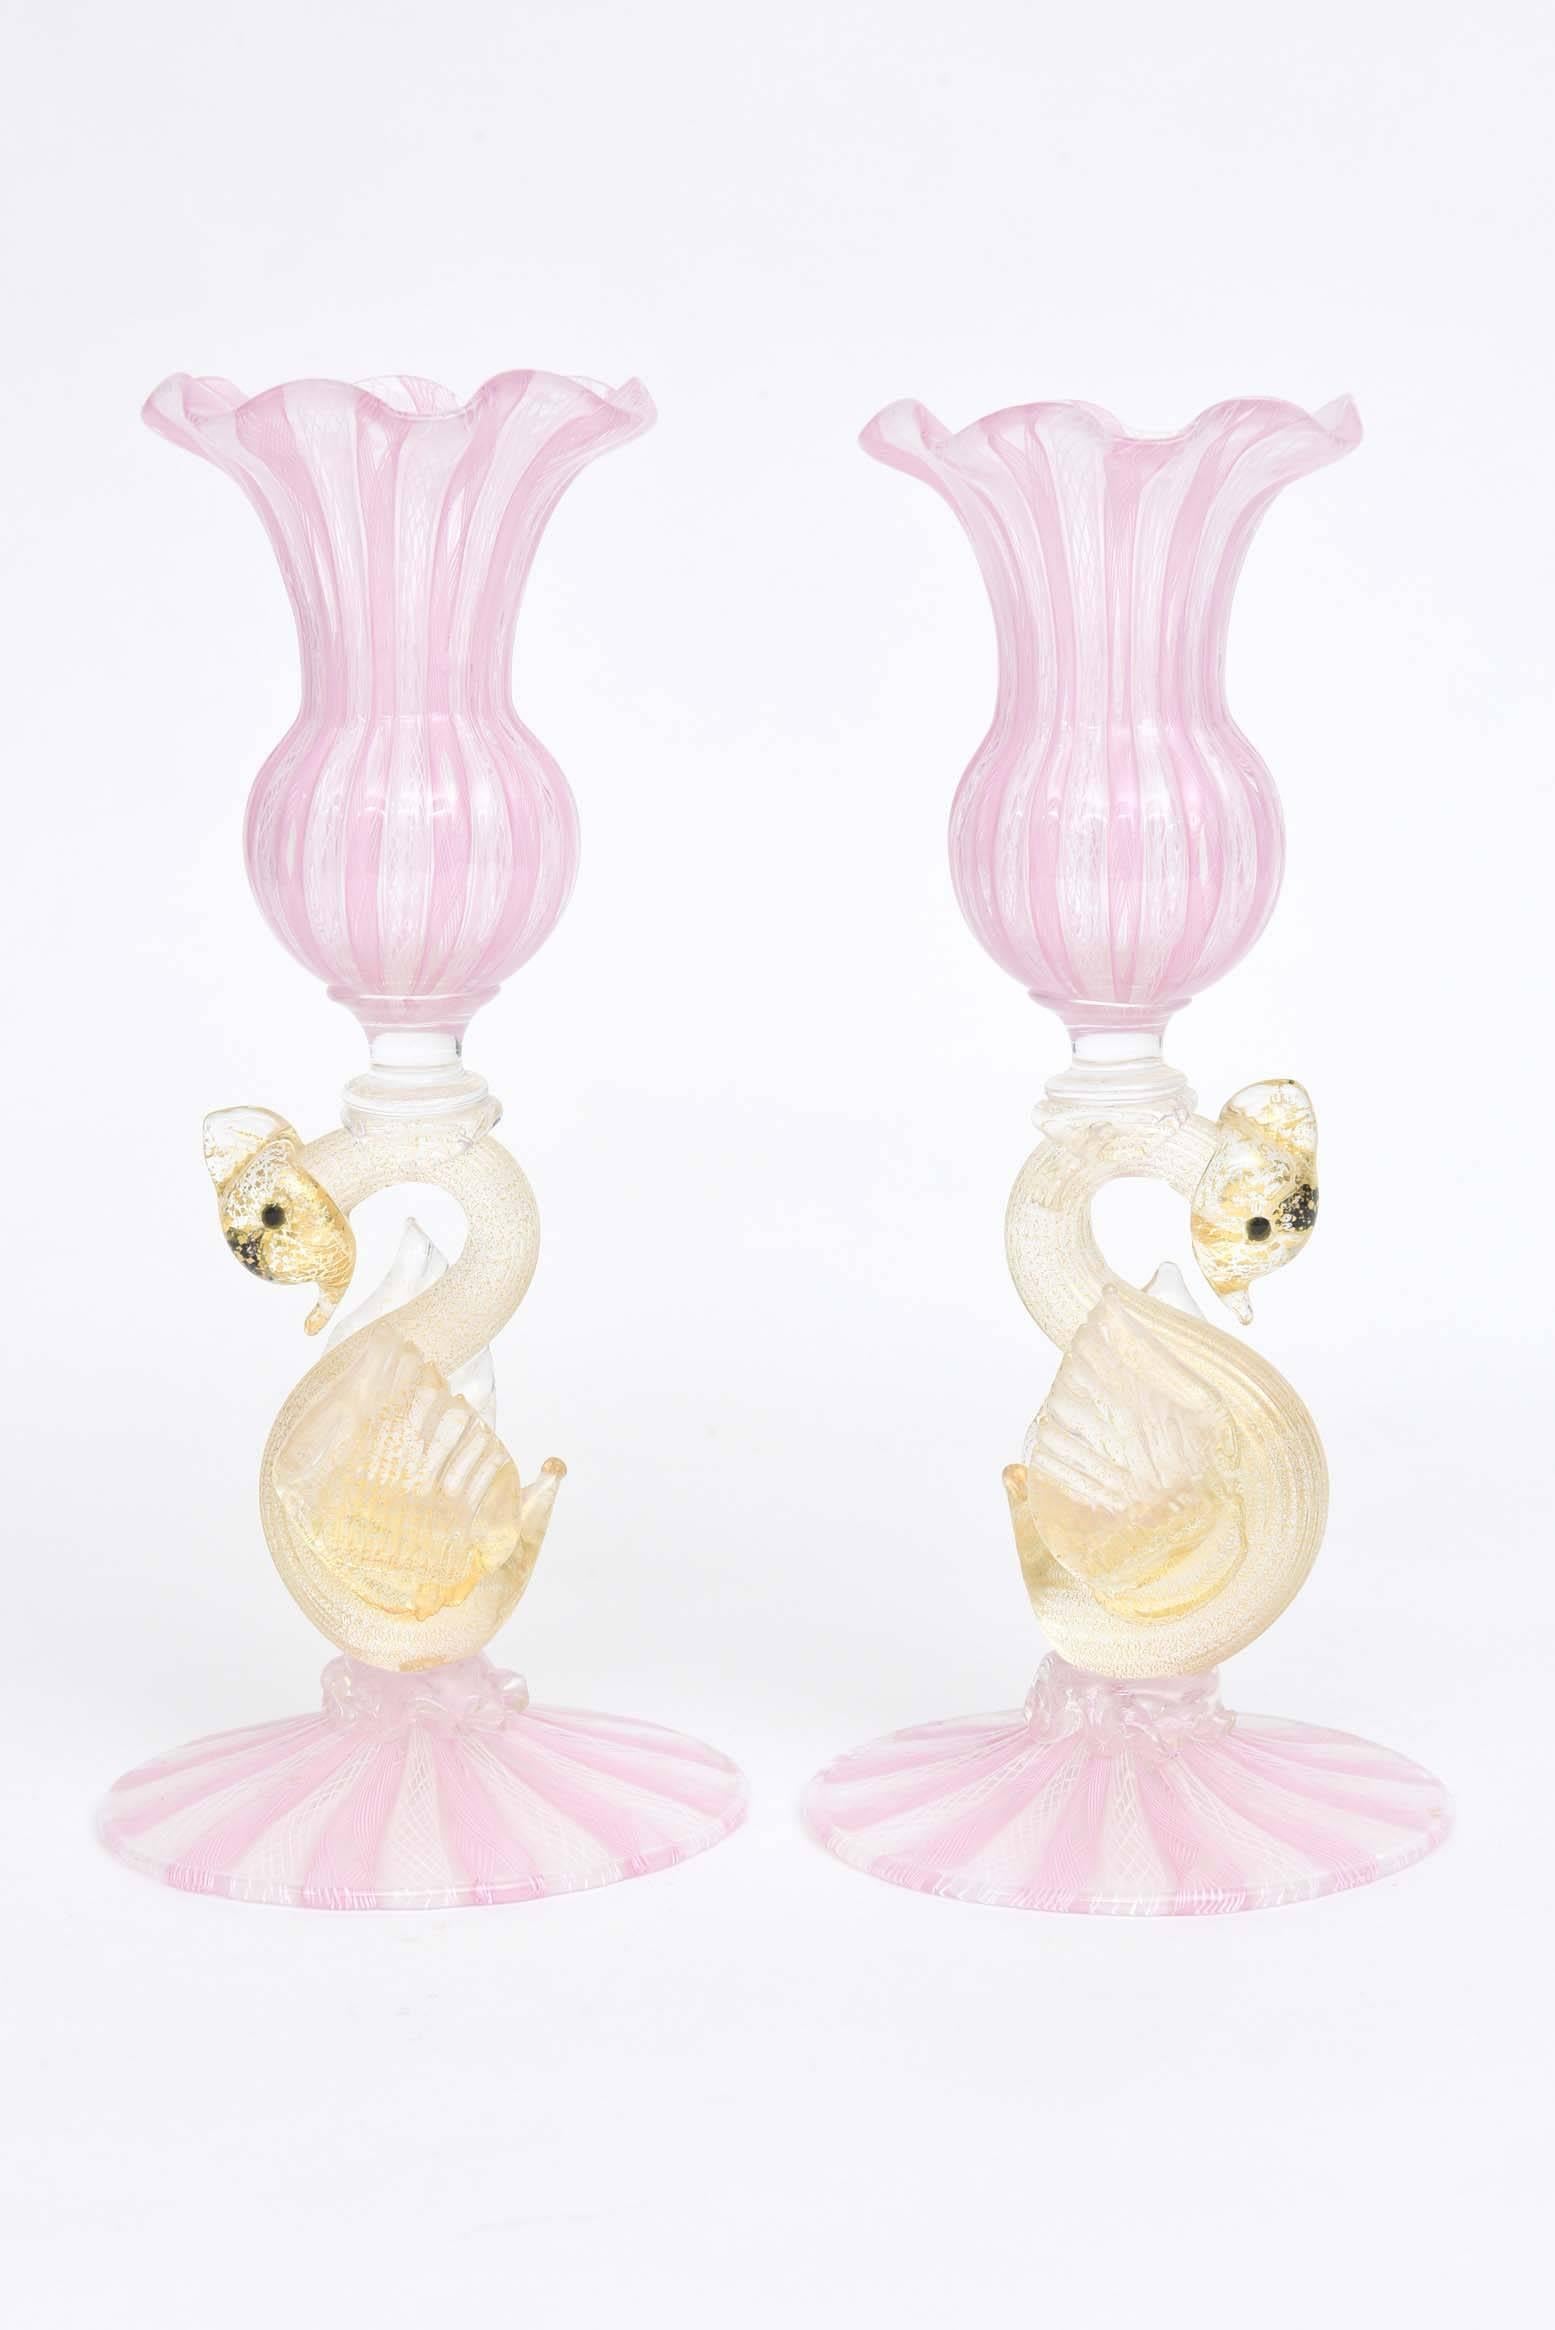 Hand-Crafted Pair of Venetian Glass Candlesticks, Pink and White Latticino with Figural Swans